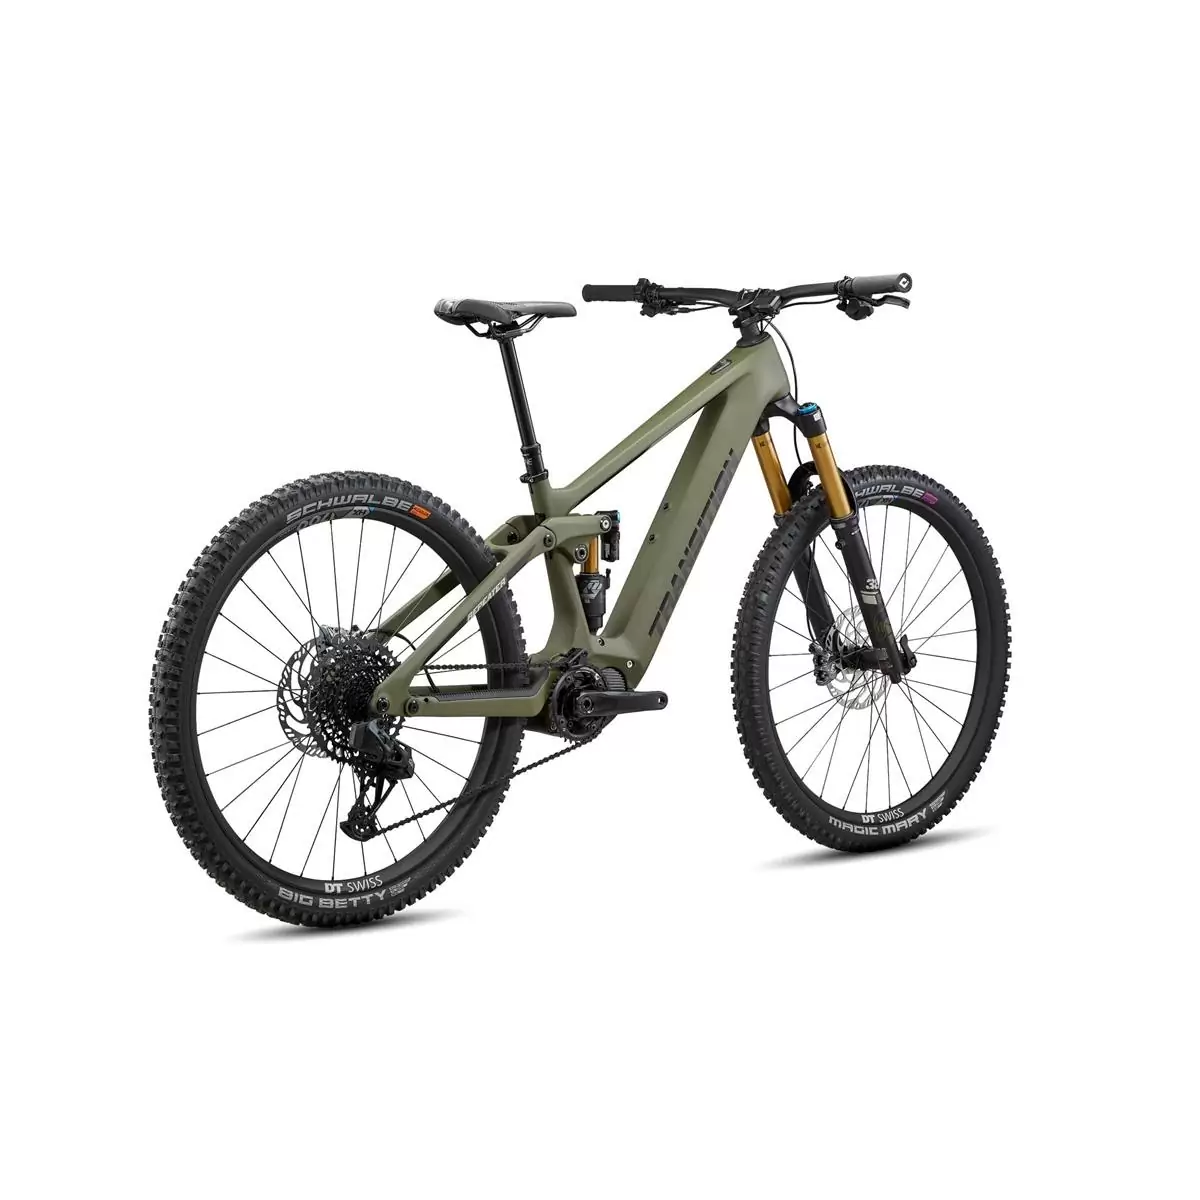 Repeater Carbon AXS 29'' 160mm 12v 630Wh Shimano EP8 Mossy Green Taglia S #2